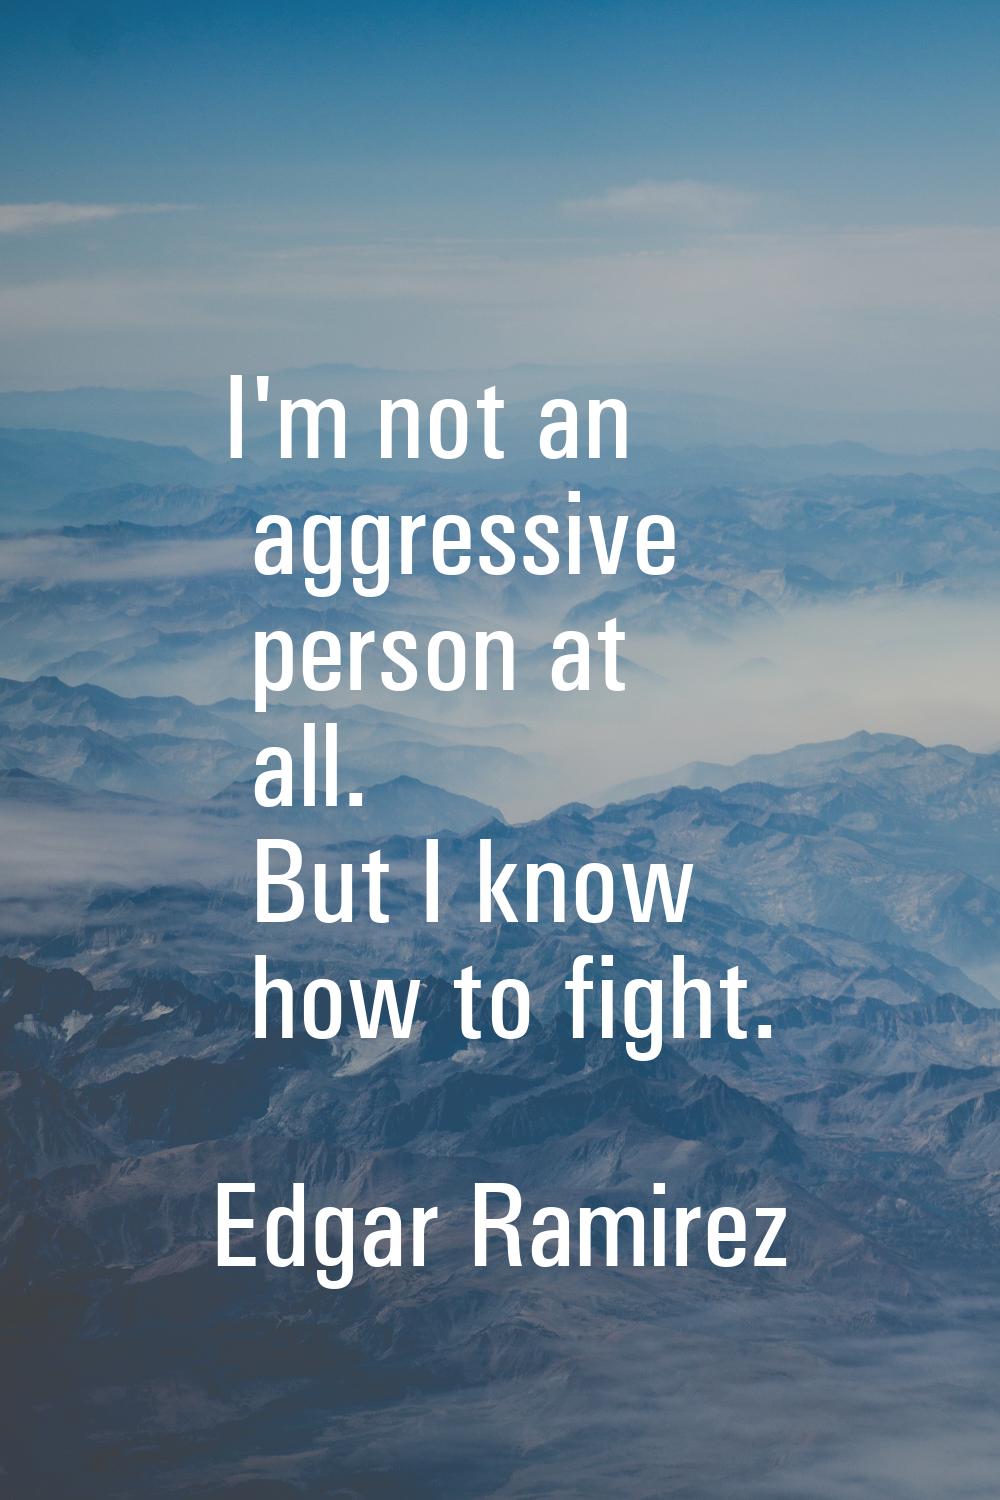 I'm not an aggressive person at all. But I know how to fight.